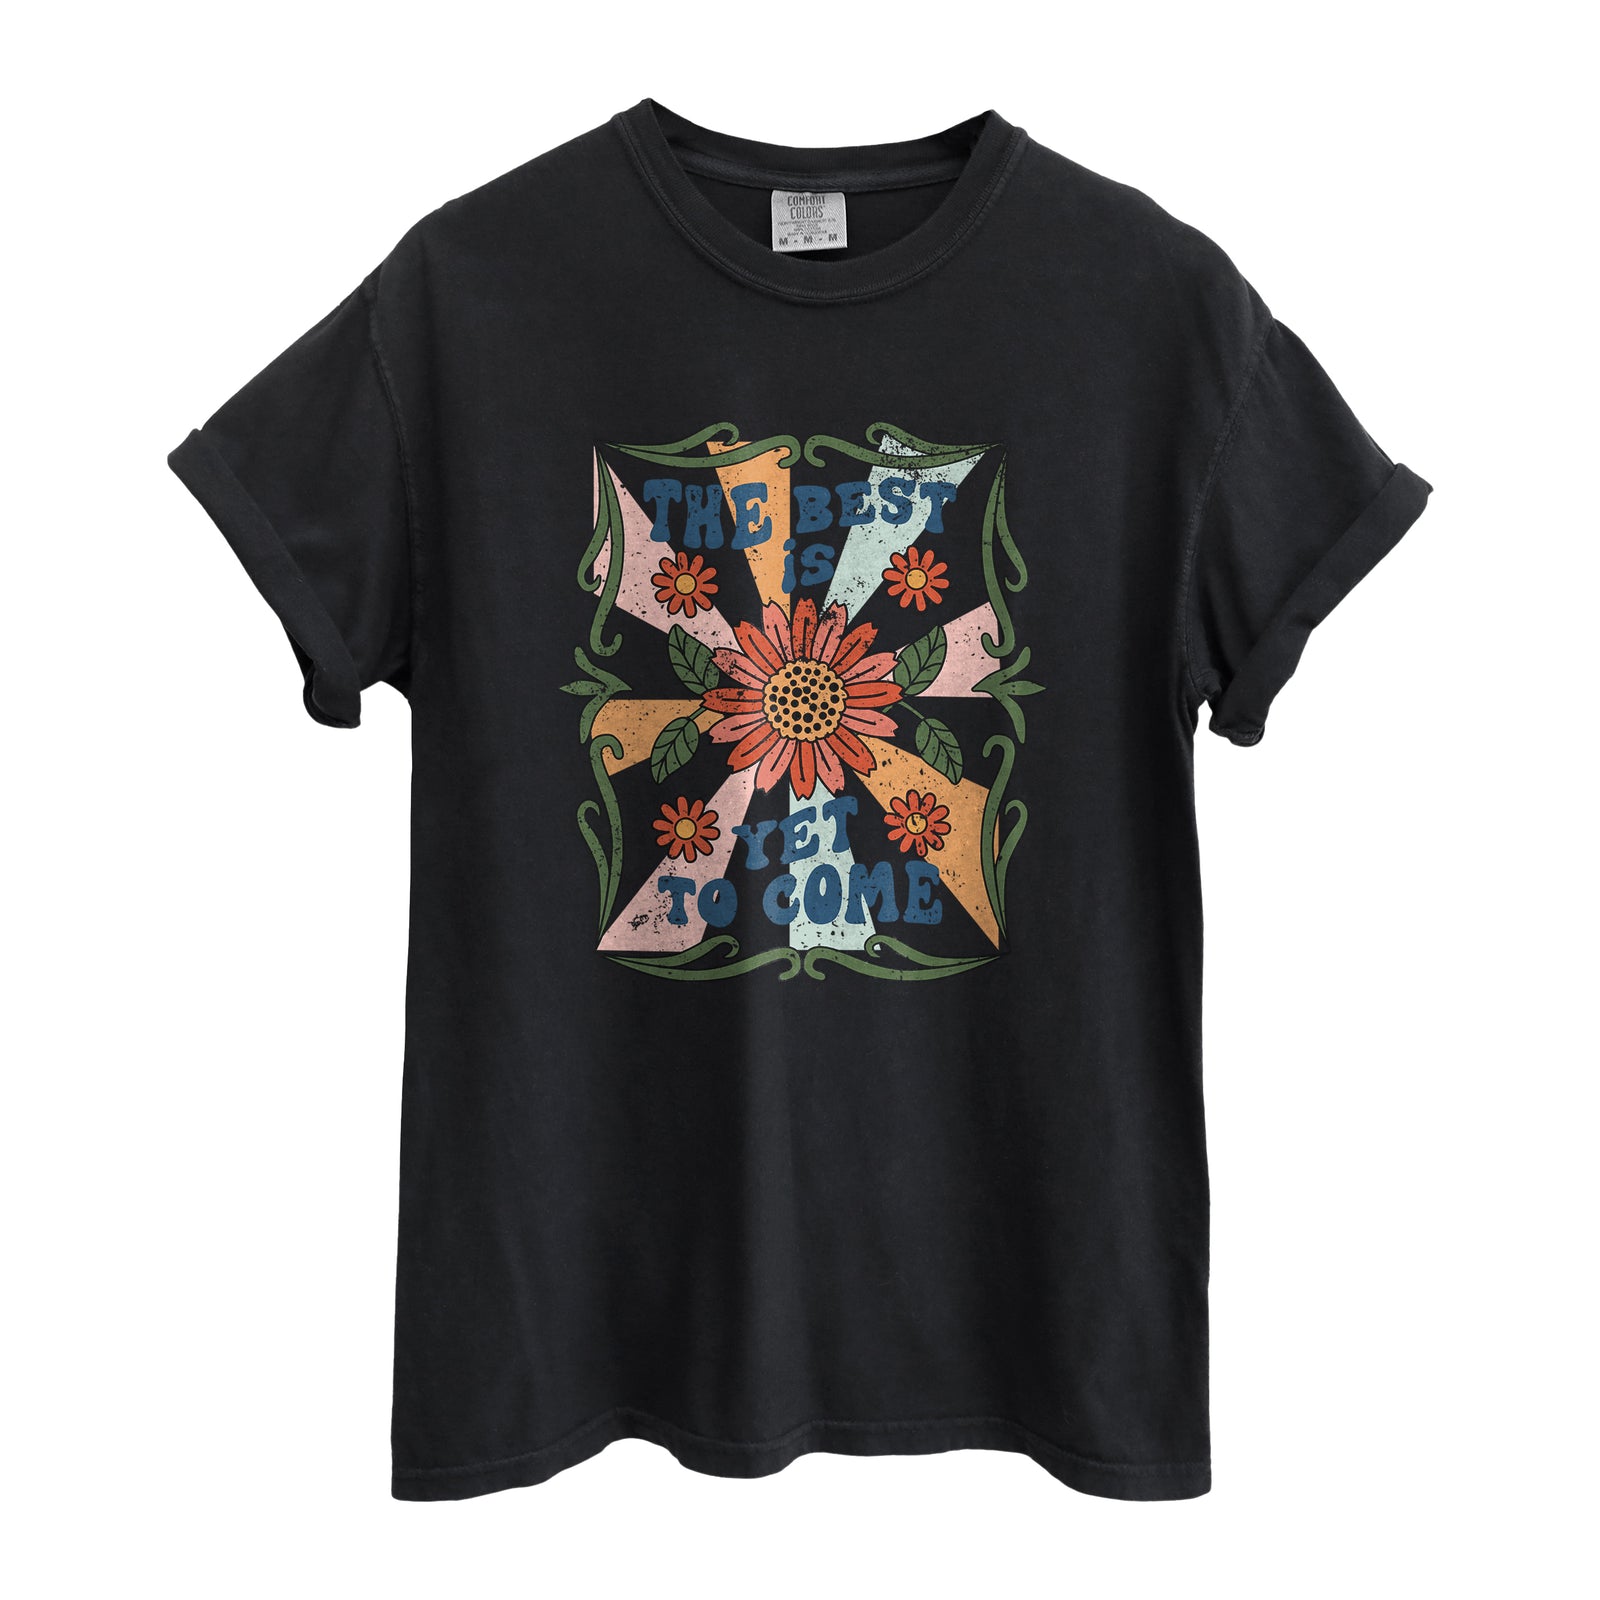 The Best is Yet to Come Oversized Shirt for Women & Men Garment-Dyed Graphic Tee